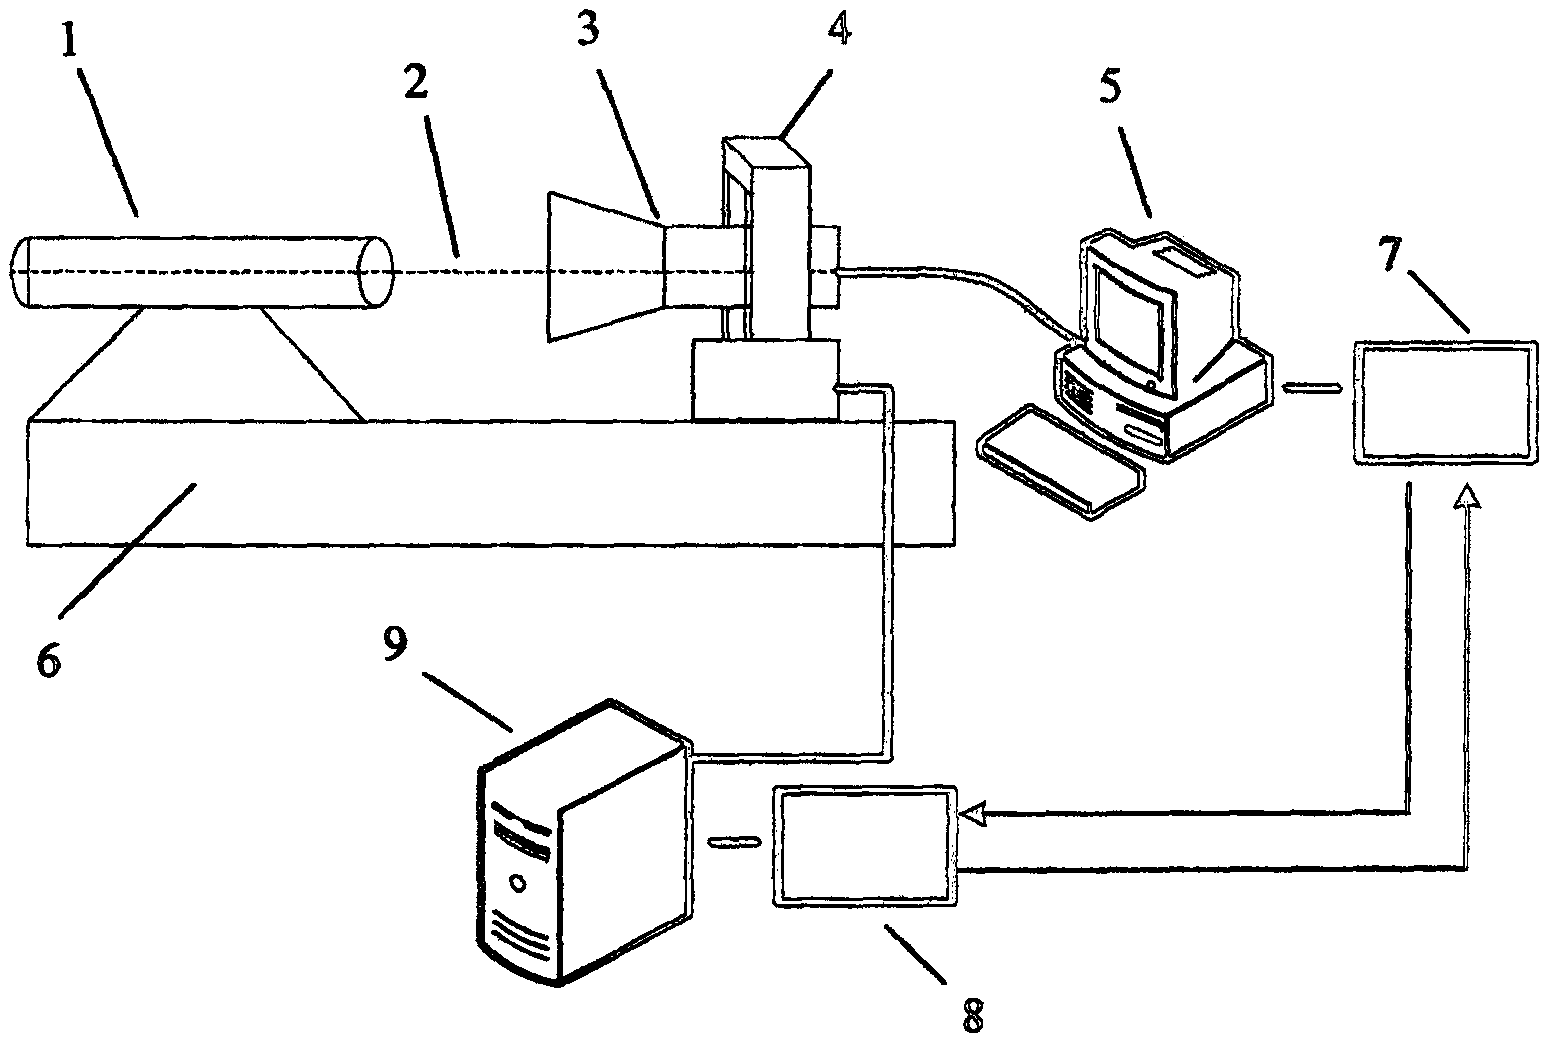 A dynamic calibration device and calibration method for a star sensor